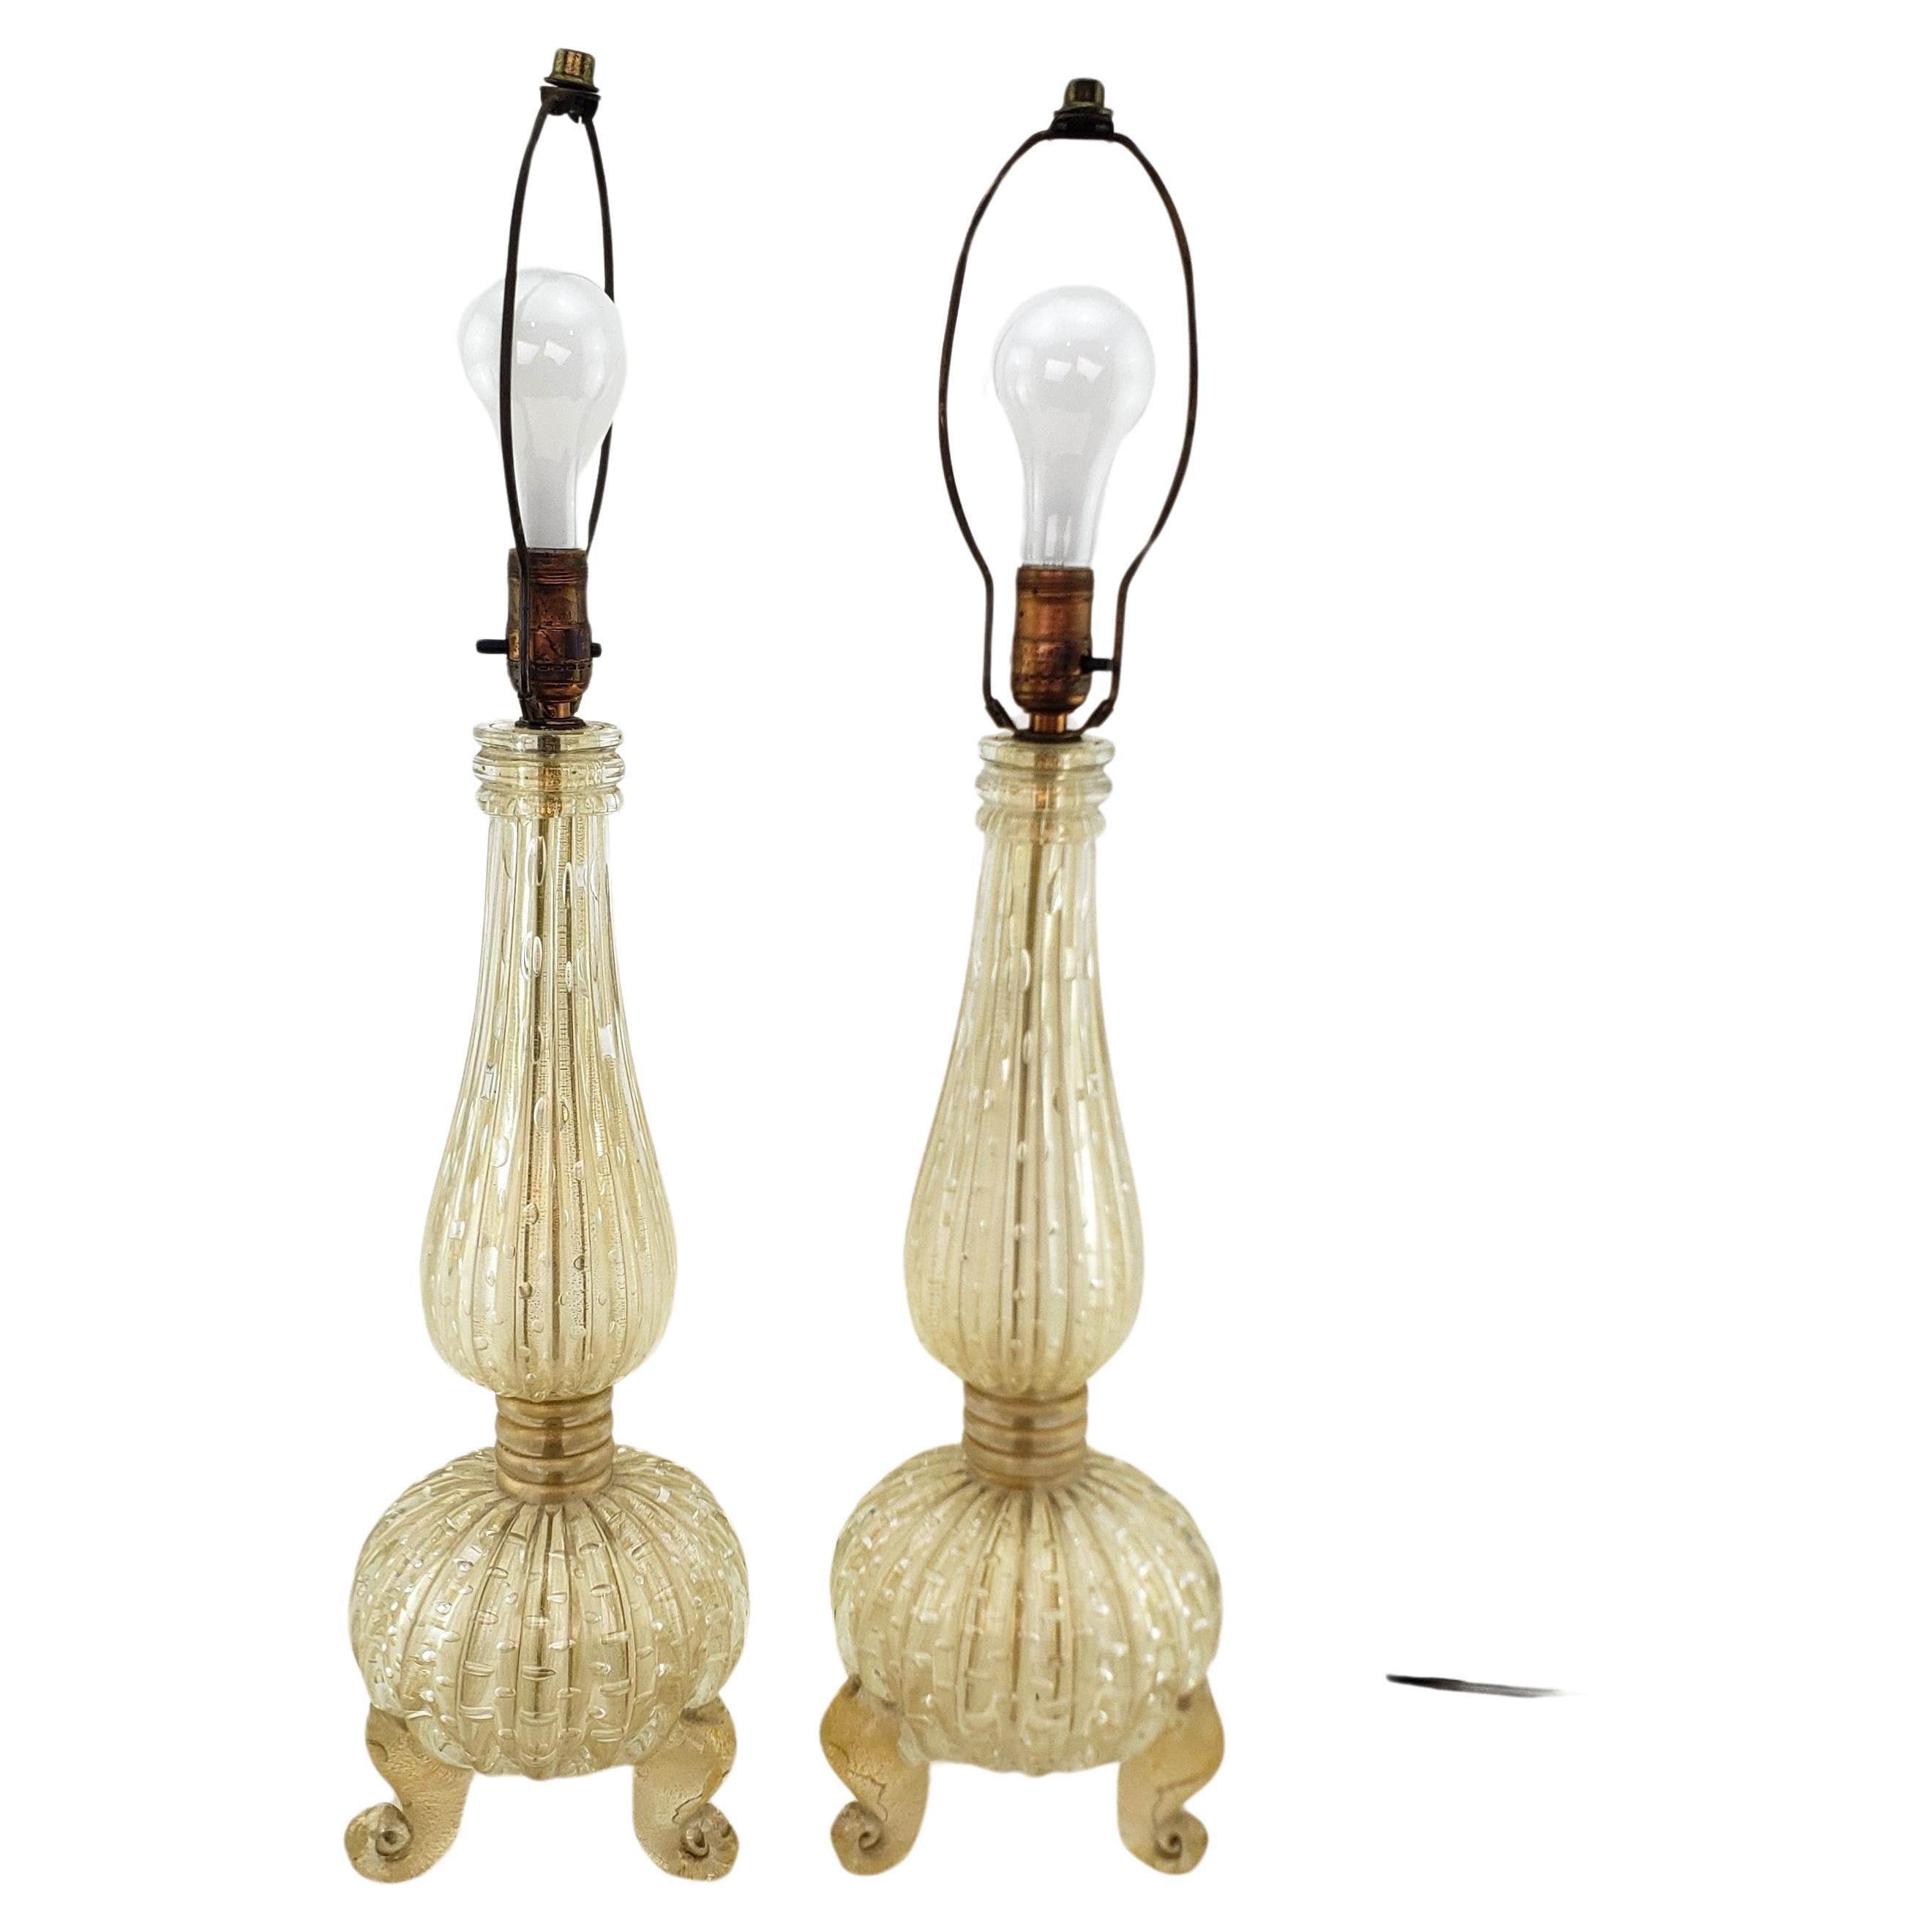 Pair of BarovierAttributed  Mid-Century Modern Murano Art Glass Table Lamps  For Sale